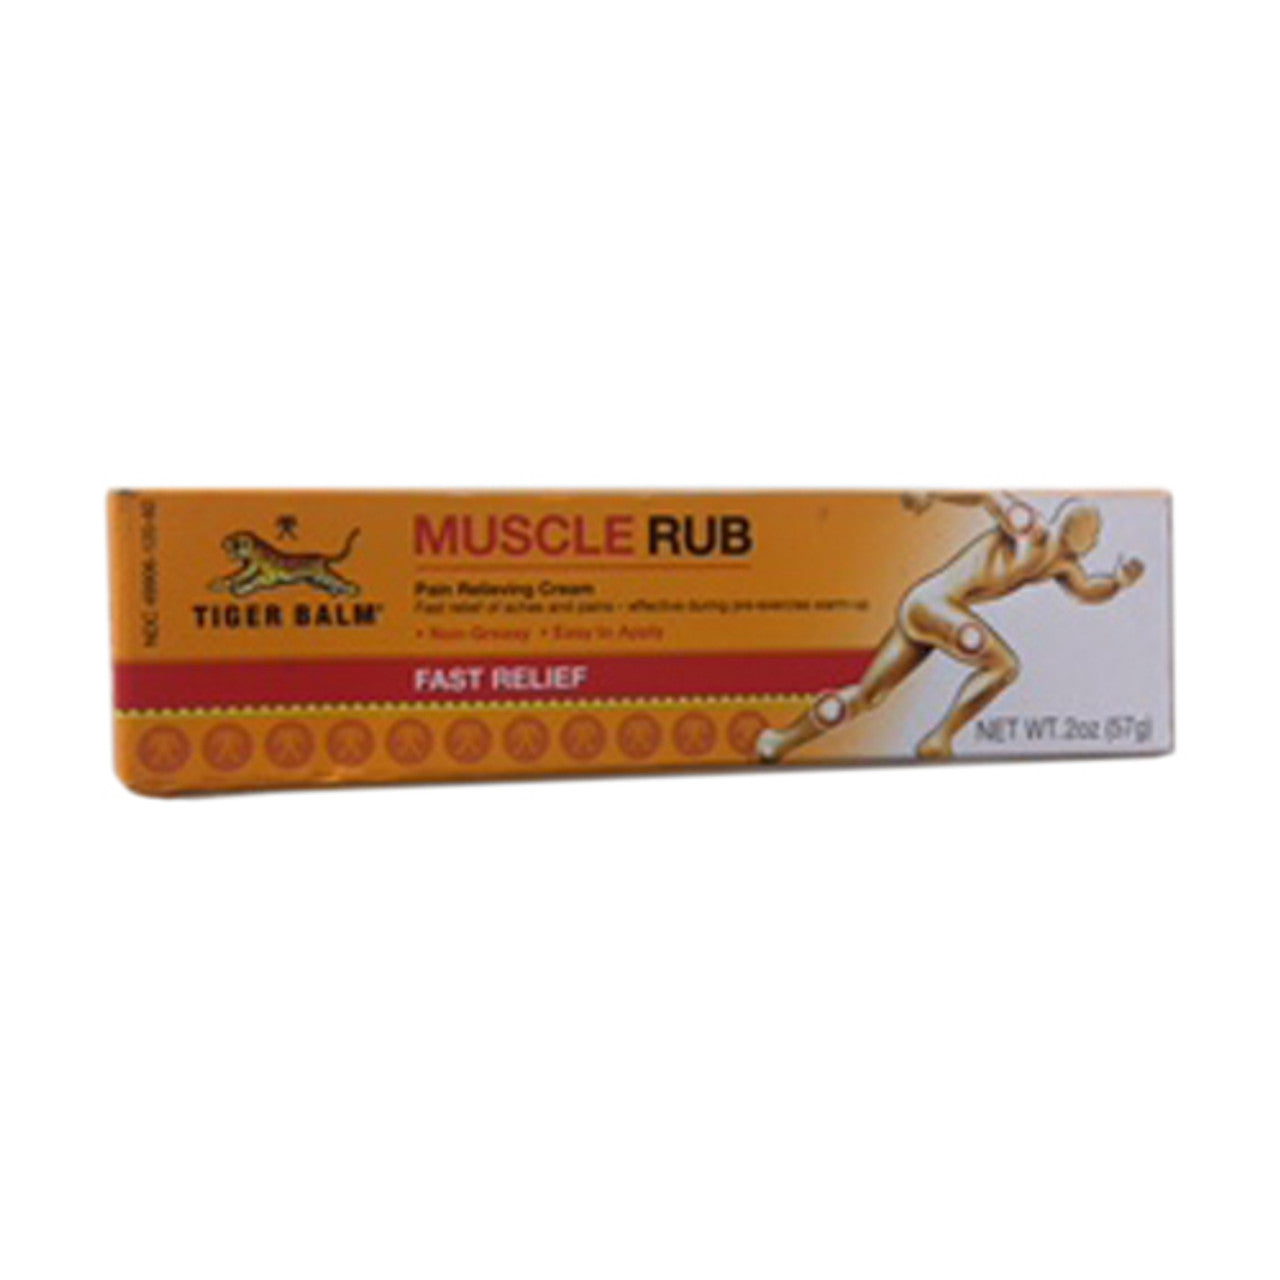 Tiger Balm Muscle Rub For Muscle Pains - 2 Oz